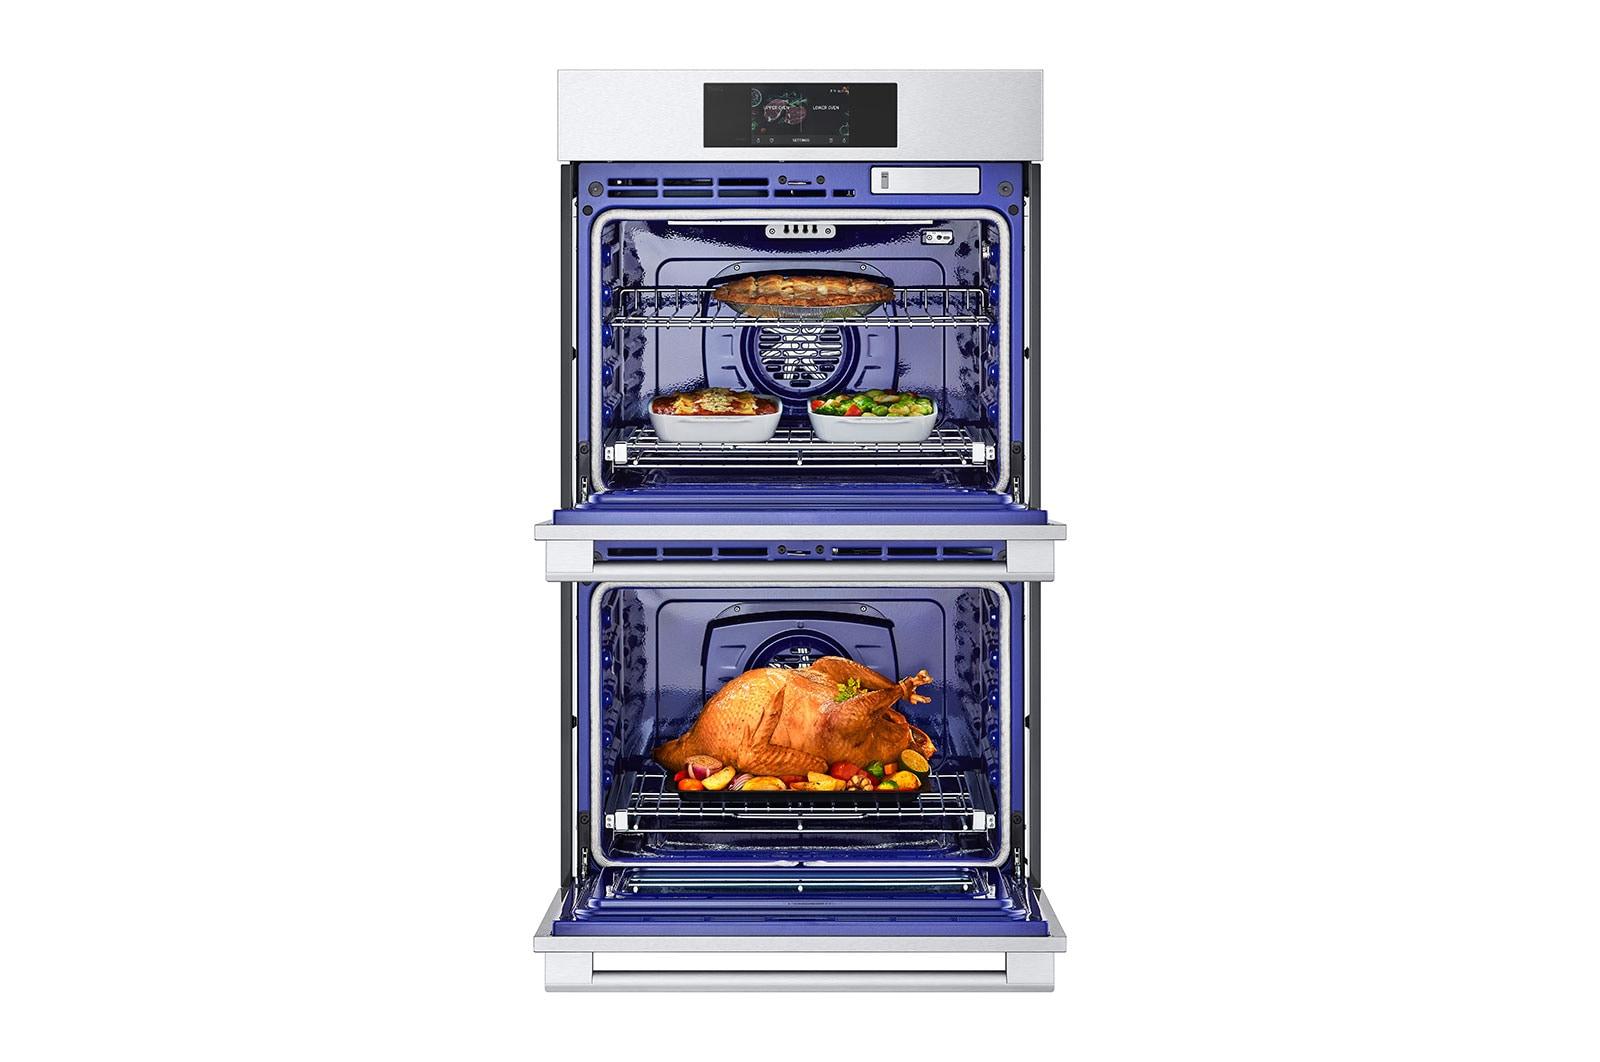 LG STUDIO 9.4 cu. ft. Smart InstaView® Electric Double Built-In Wall Oven with Air Fry